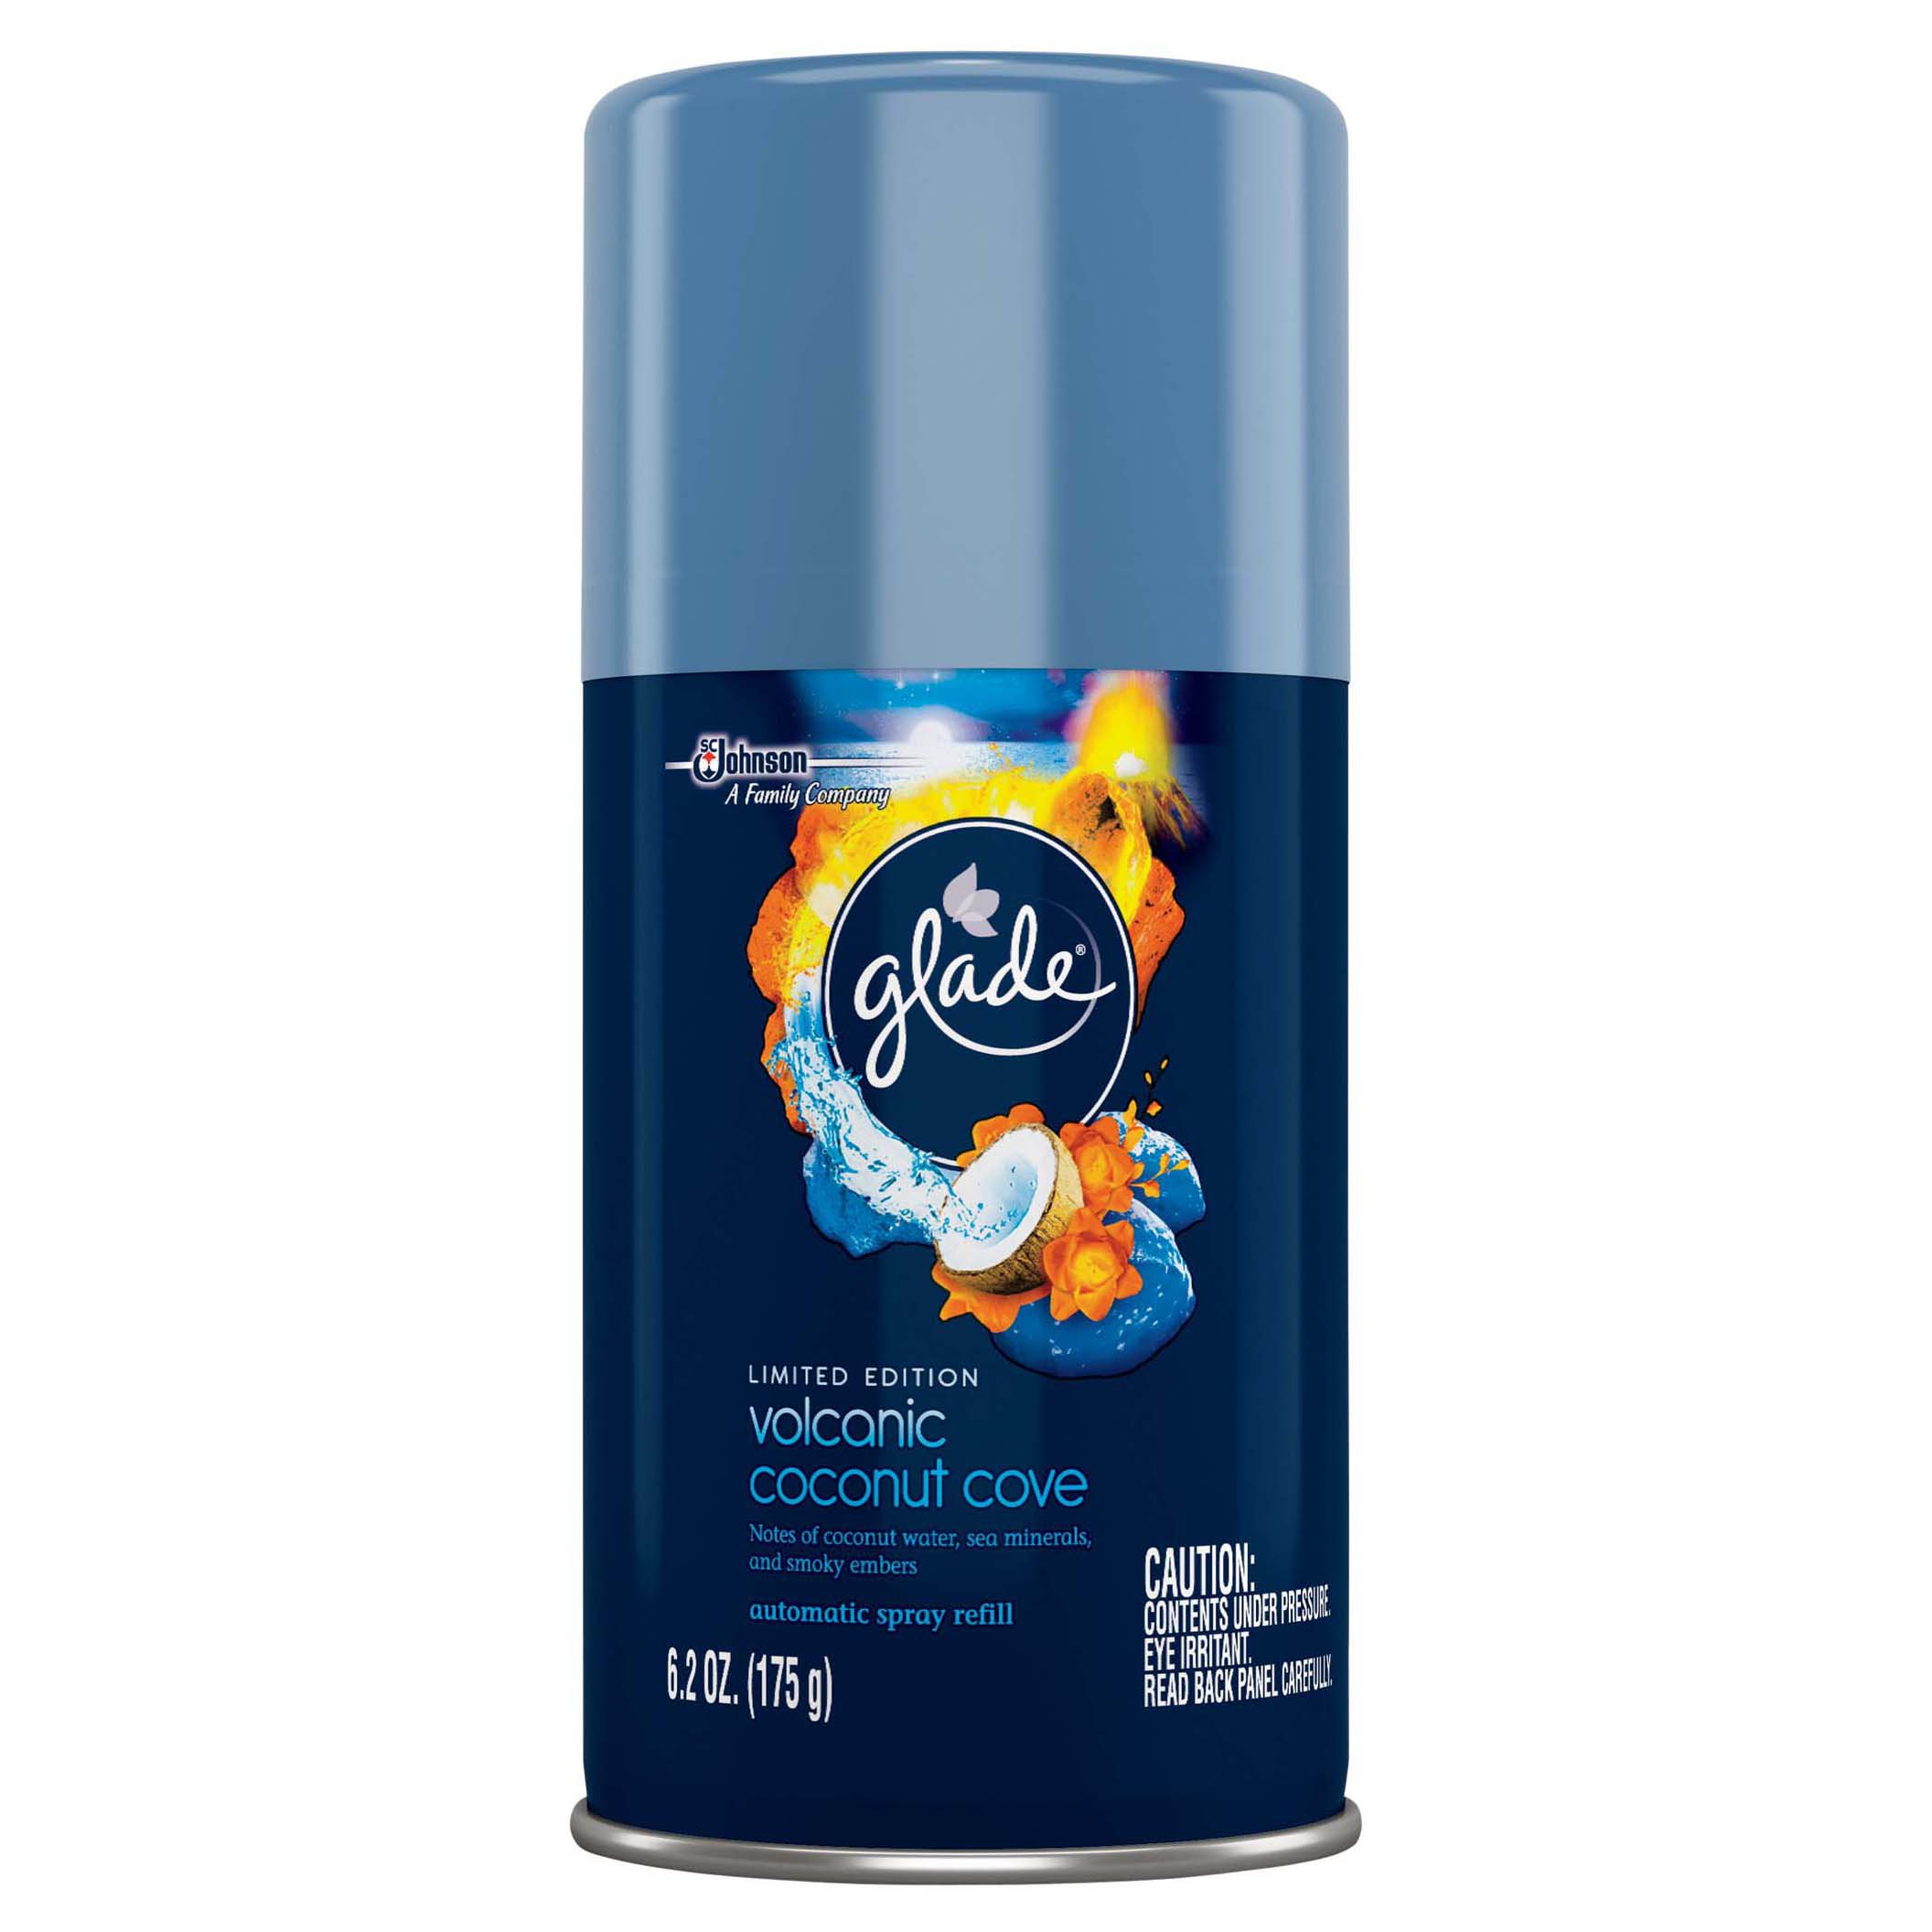 Glade Automatic Spray Refill Volcanic Coconut Cove - Shop Air Fresheners at  H-E-B